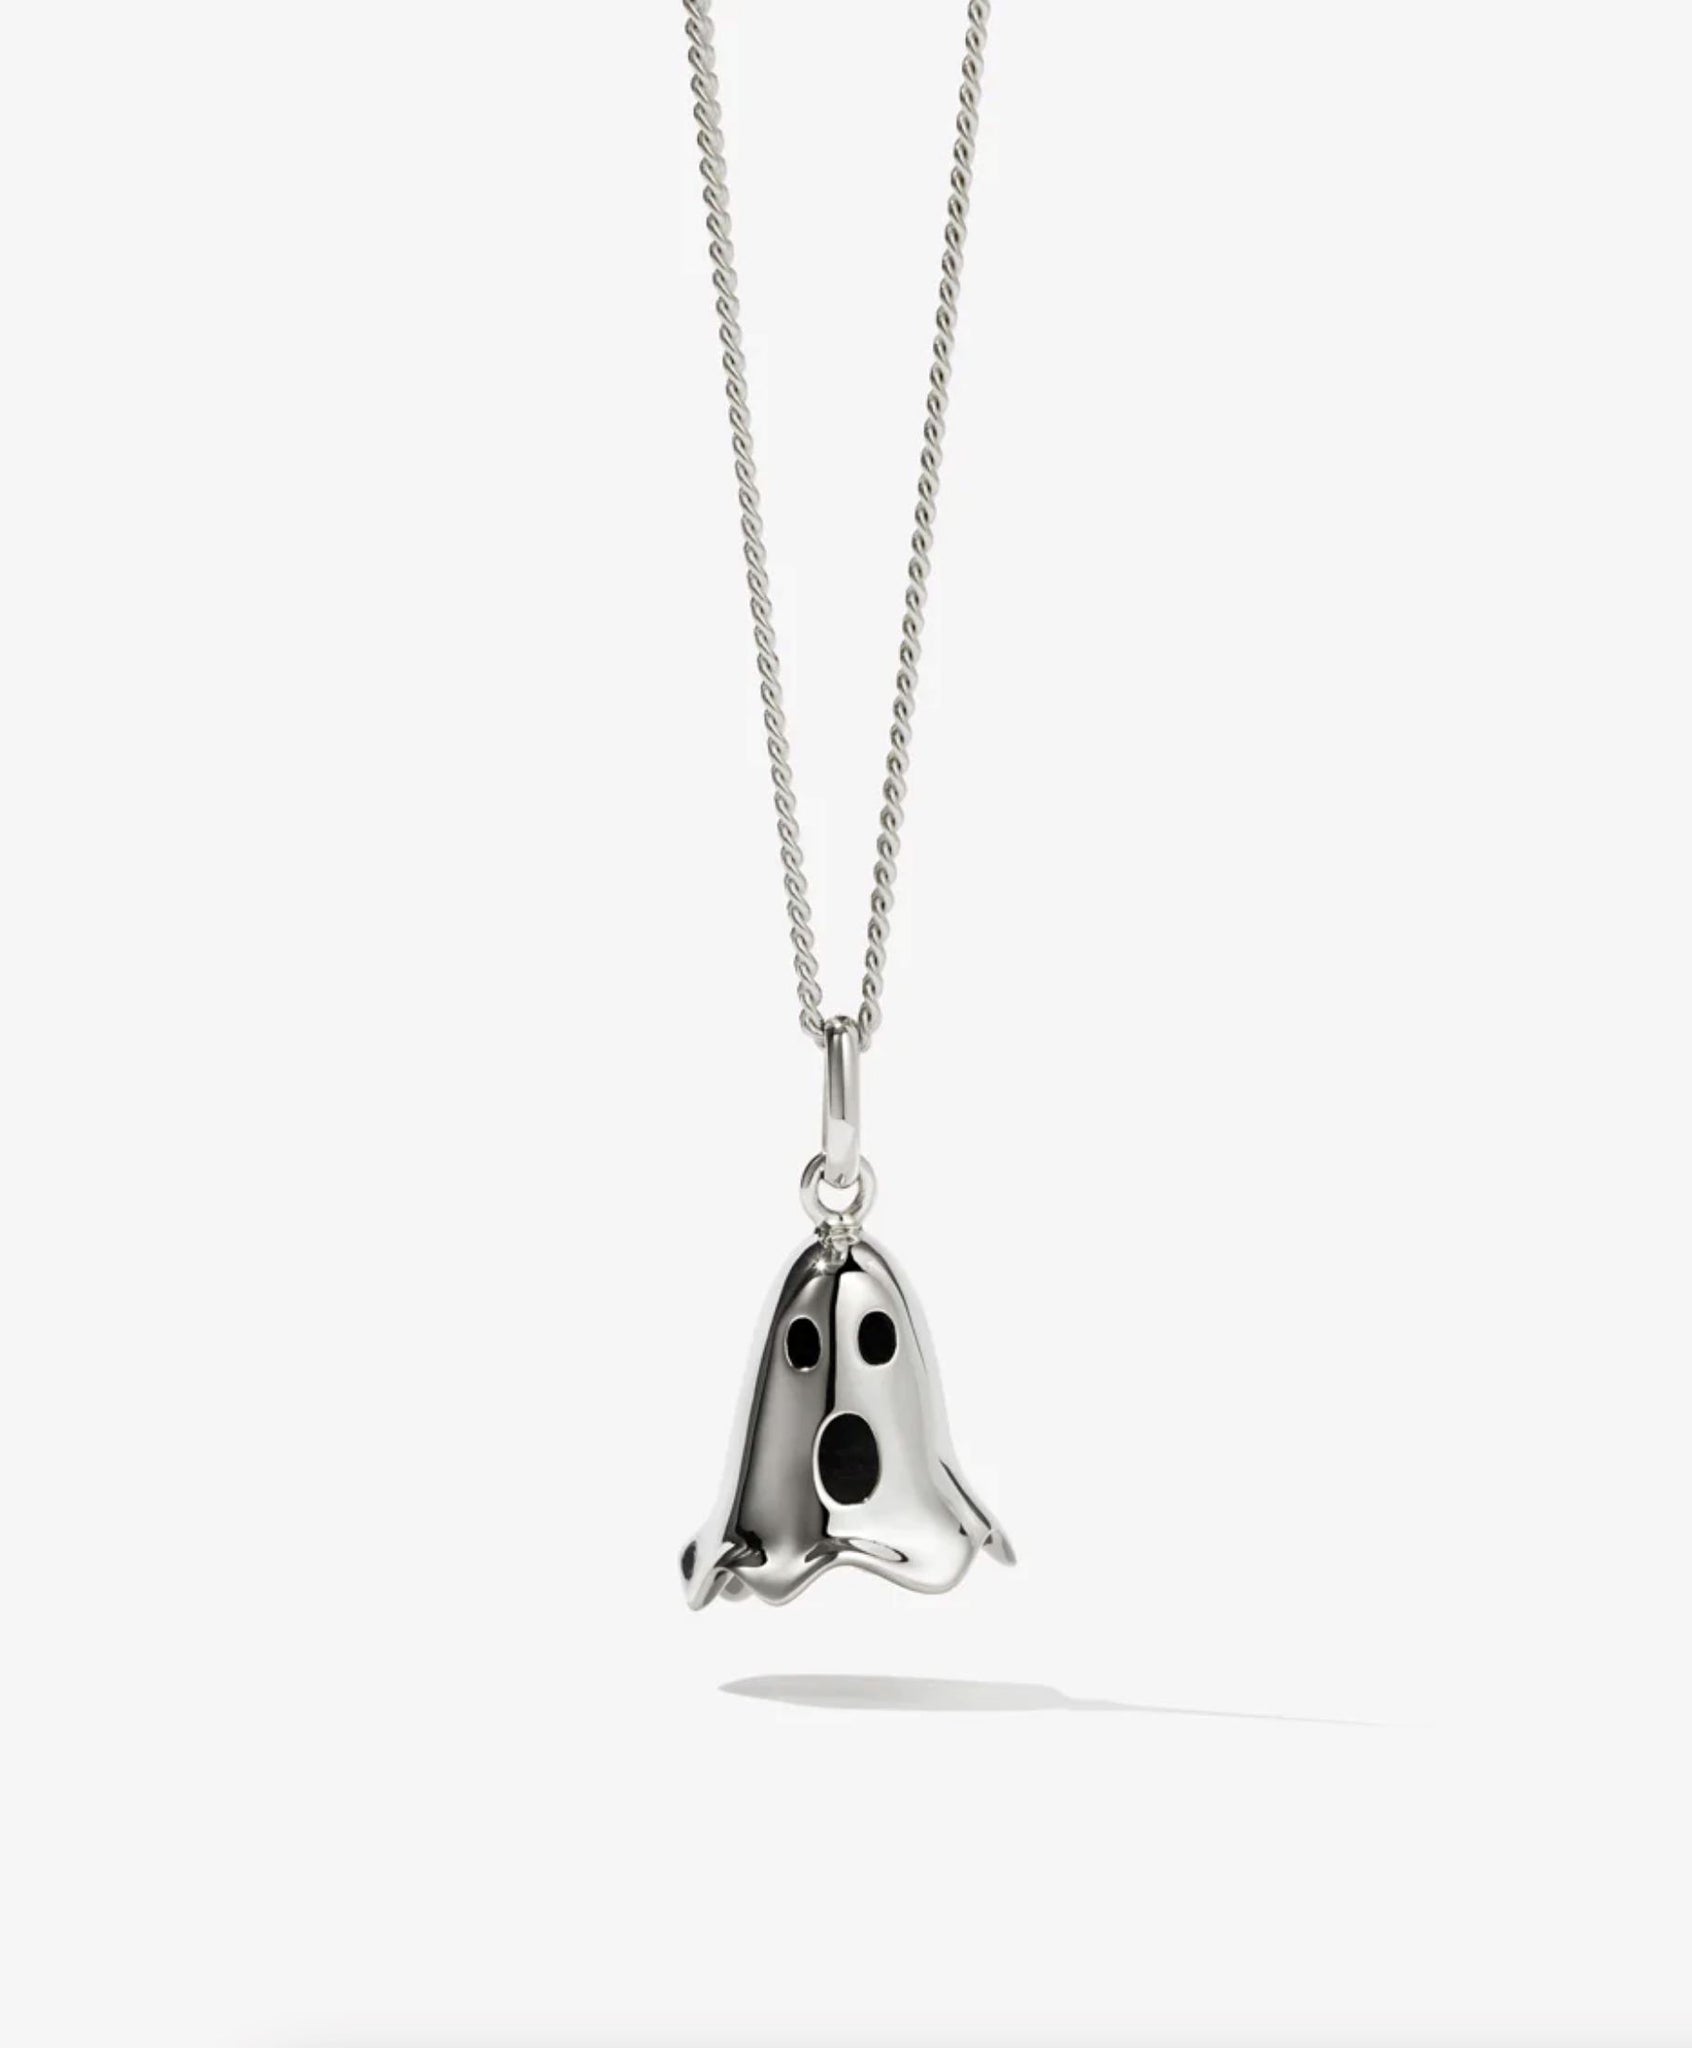 Nell x Meadowlark Ghost Necklace Sterling Silver - Third Drawer Down